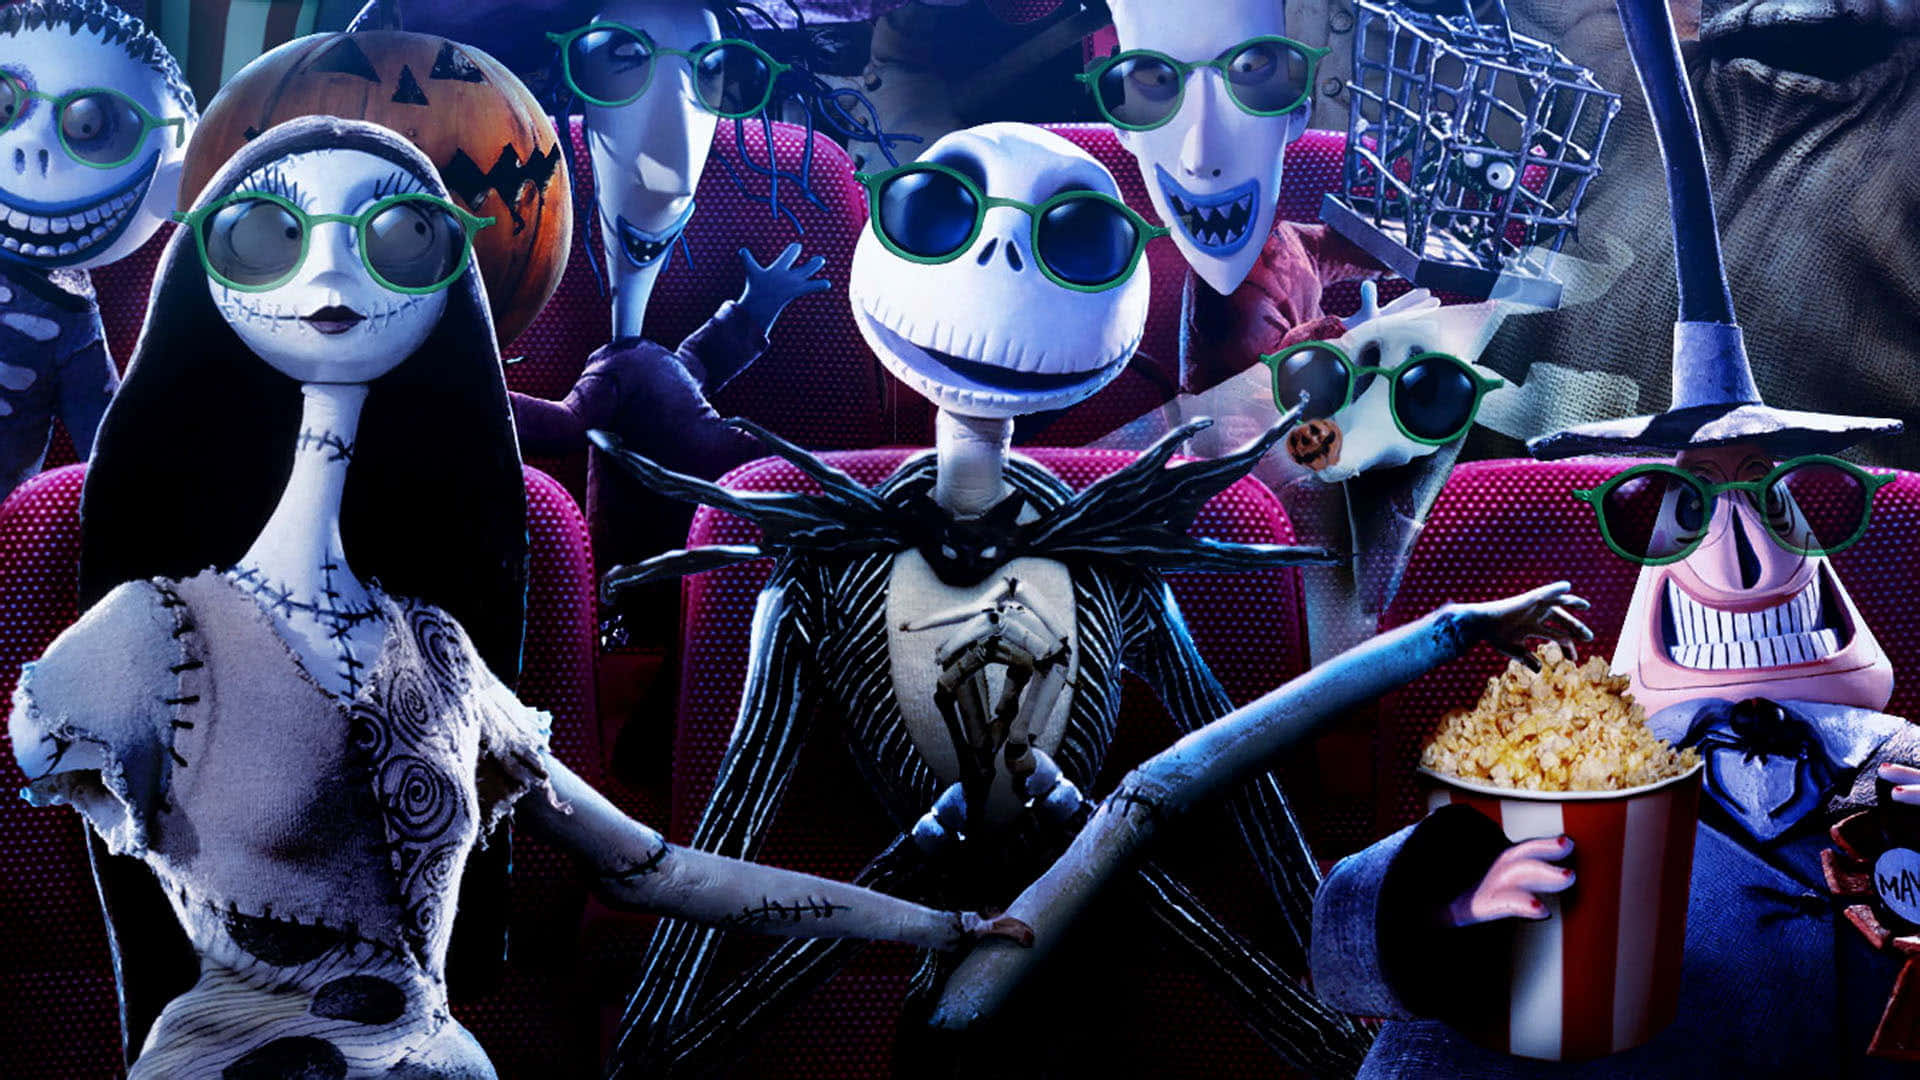 The Nightmare Before Christmas Movie Theater Background